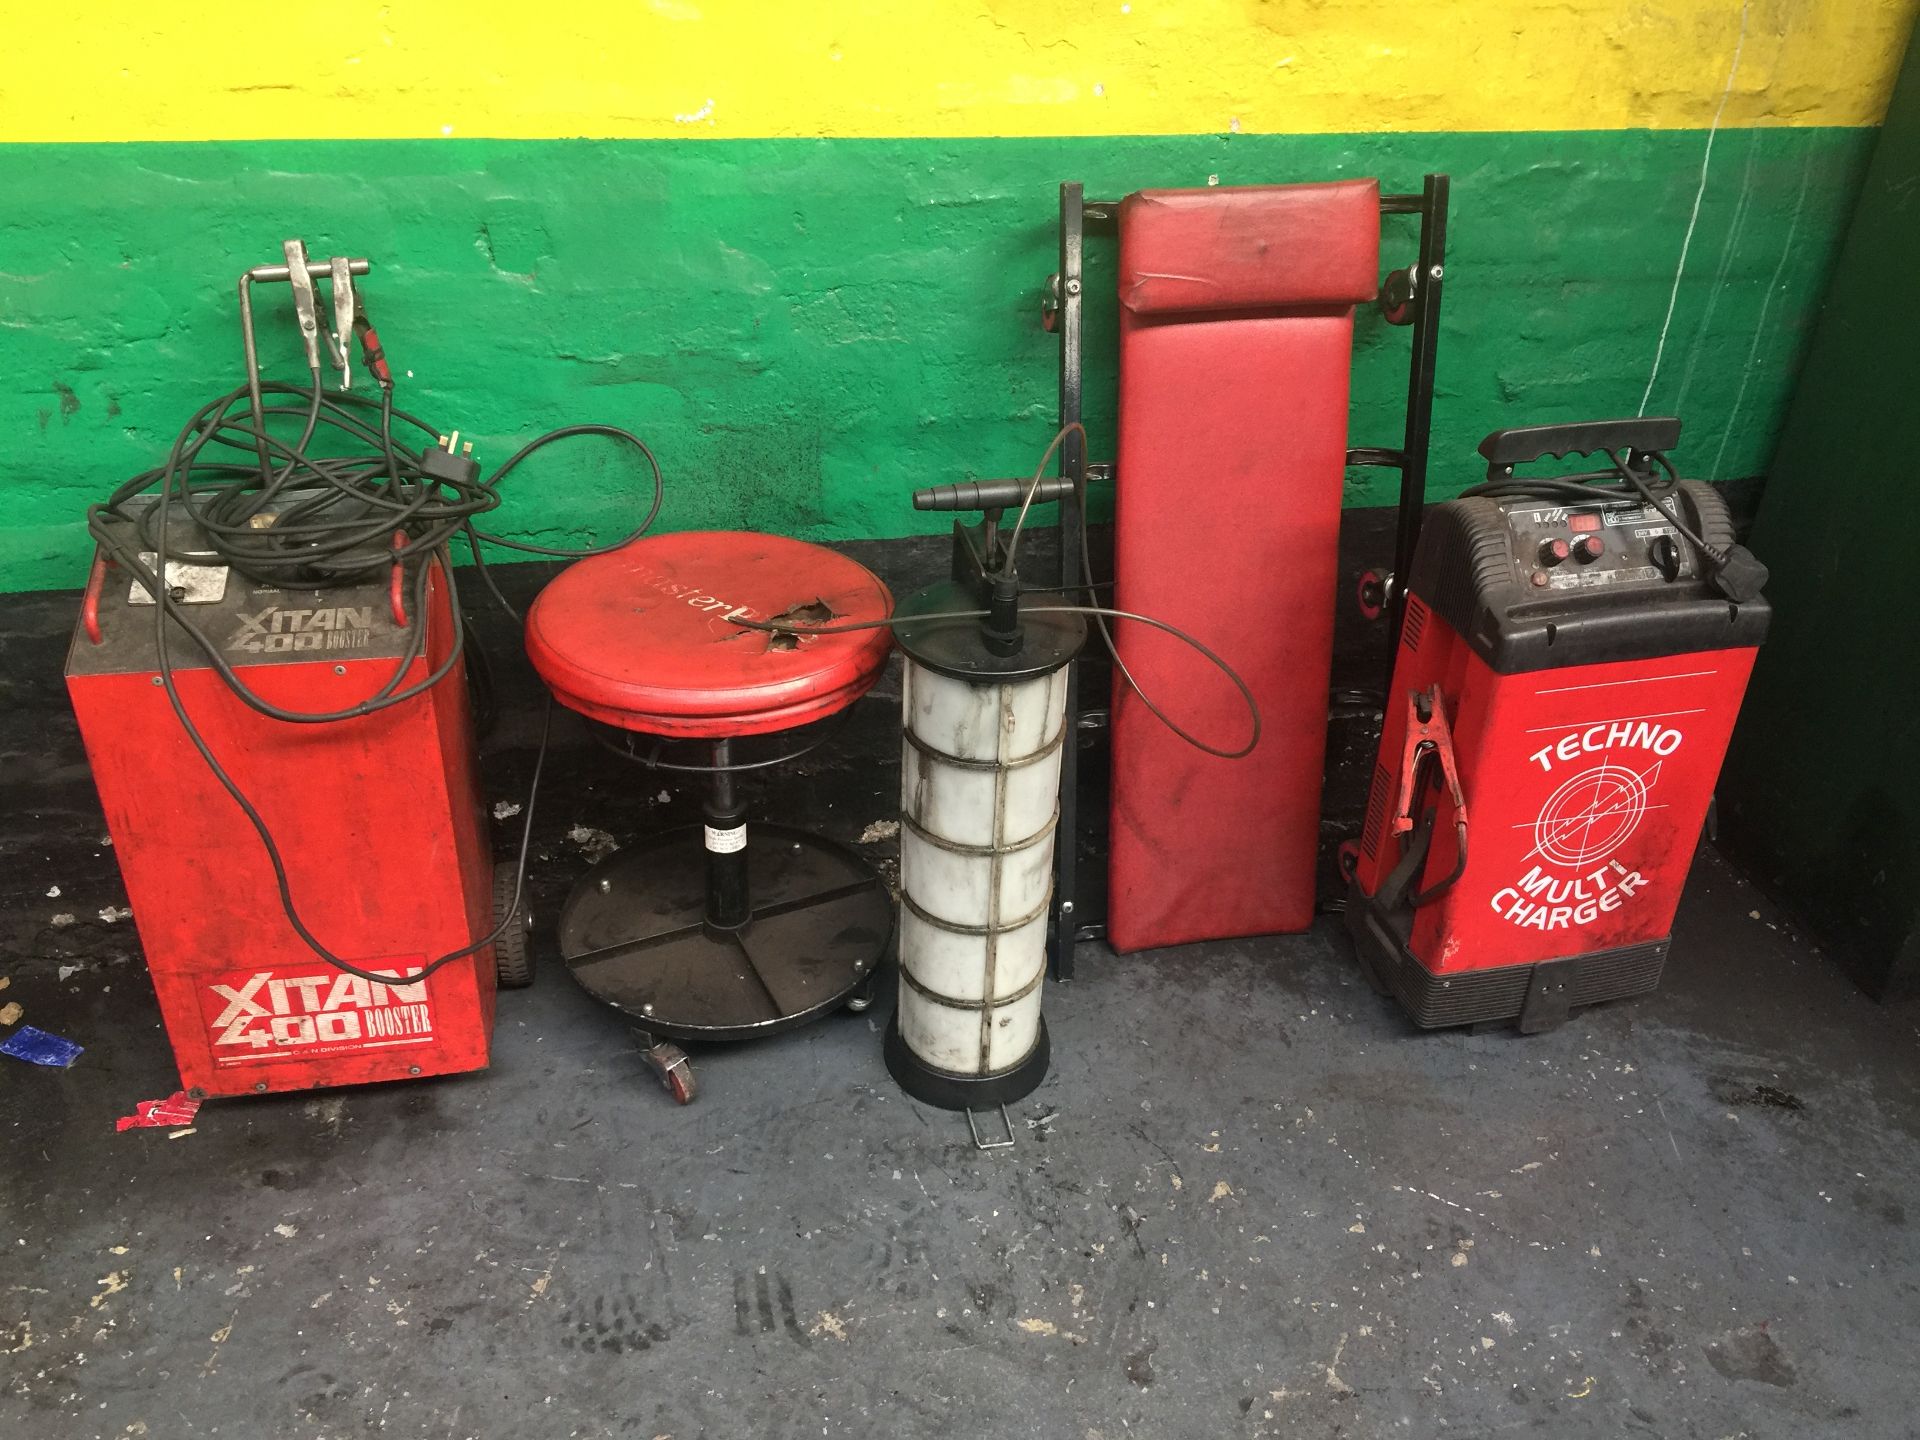 Techno Multi Charger, Xitan 400 Booster, stool, oil drainer and a trolley